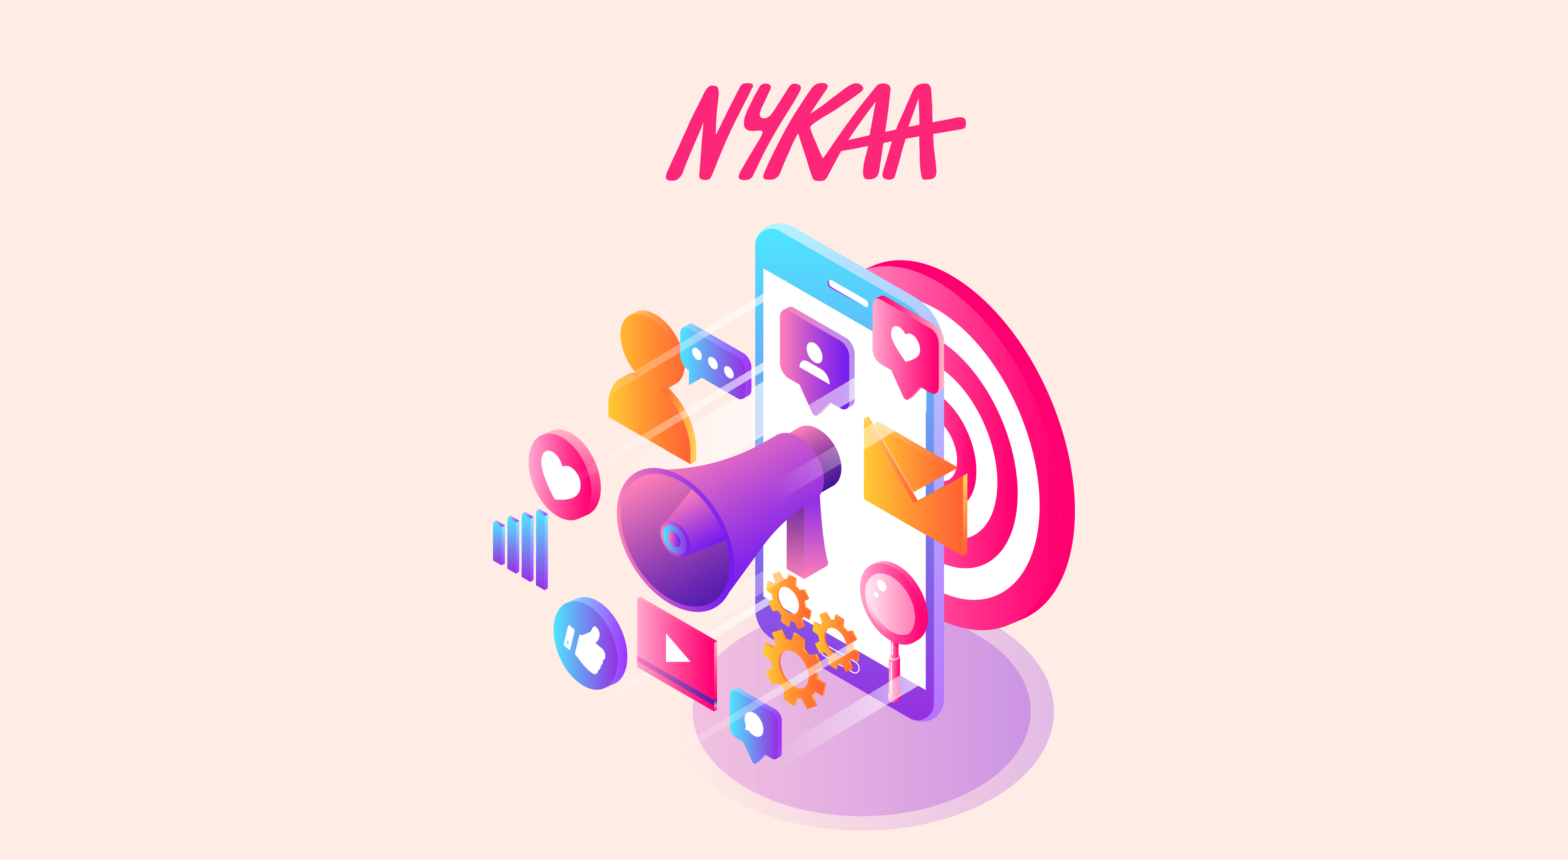 Why Is the Nykaa Marketing Strategy So Successful?